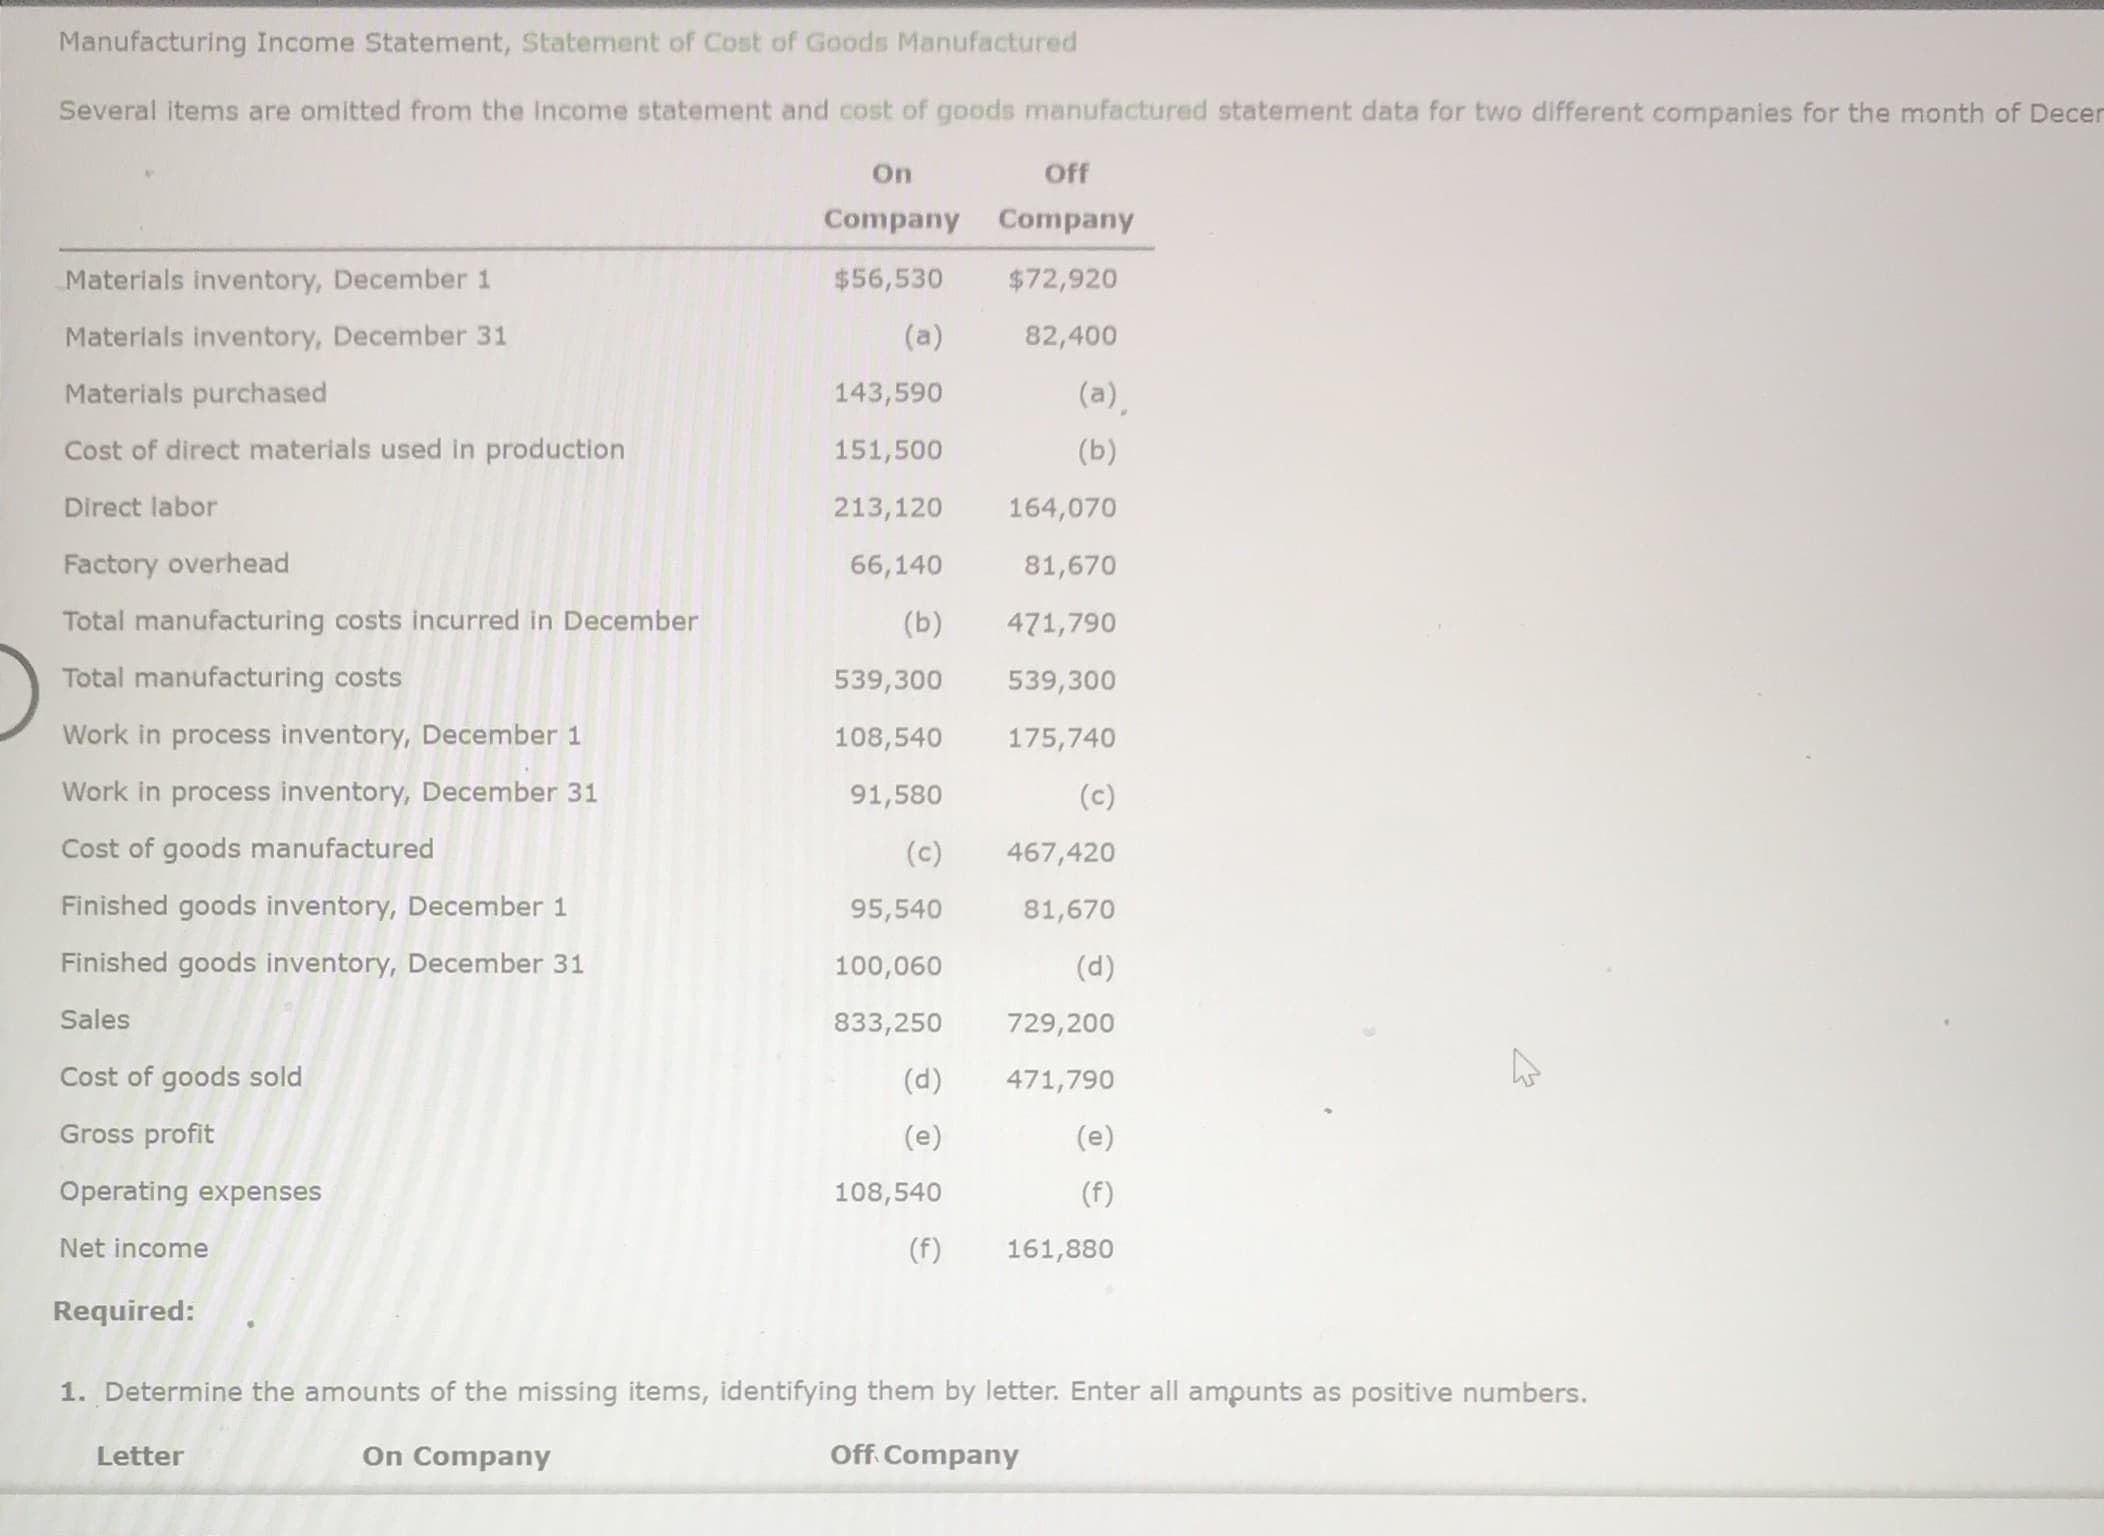 Several items are omitted from the Income statement and cost of goods manufactured statement data for two different companies for the month of Decer
On
Off
Company Company
Materials inventory, December 1
$56,530
$72,920
Materials inventory, December 31
(a)
82,400
Materials purchased
143,590
(a),
Cost of direct materials used in production
151,500
(b)
Direct labor
213,120
164,070
Factory overhead
66,140
81,670
Total manufacturing costs incurred in December
(b)
471,790
Total manufacturing costs
539,300
539,300
Work in process inventory, December 1
108,540
175,740
Work in process inventory, December 31
91,580
(c)
Cost of goods manufactured
(c)
467,420
Finished goods inventory, December 1
95,540
81,670
Finished goods inventory, December 31
100,060
(d)
Sales
833,250
729,200
Cost of goods sold
(d)
471,790
Gross profit
(e)
(e)
Operating expenses
108,540
(f)
Net income
(f)
161,880
Required:
1. Determine the amounts of the missing items, identifying them by letter. Enter all ampunts as positive numbers.
Letter
On Company
Off Company
